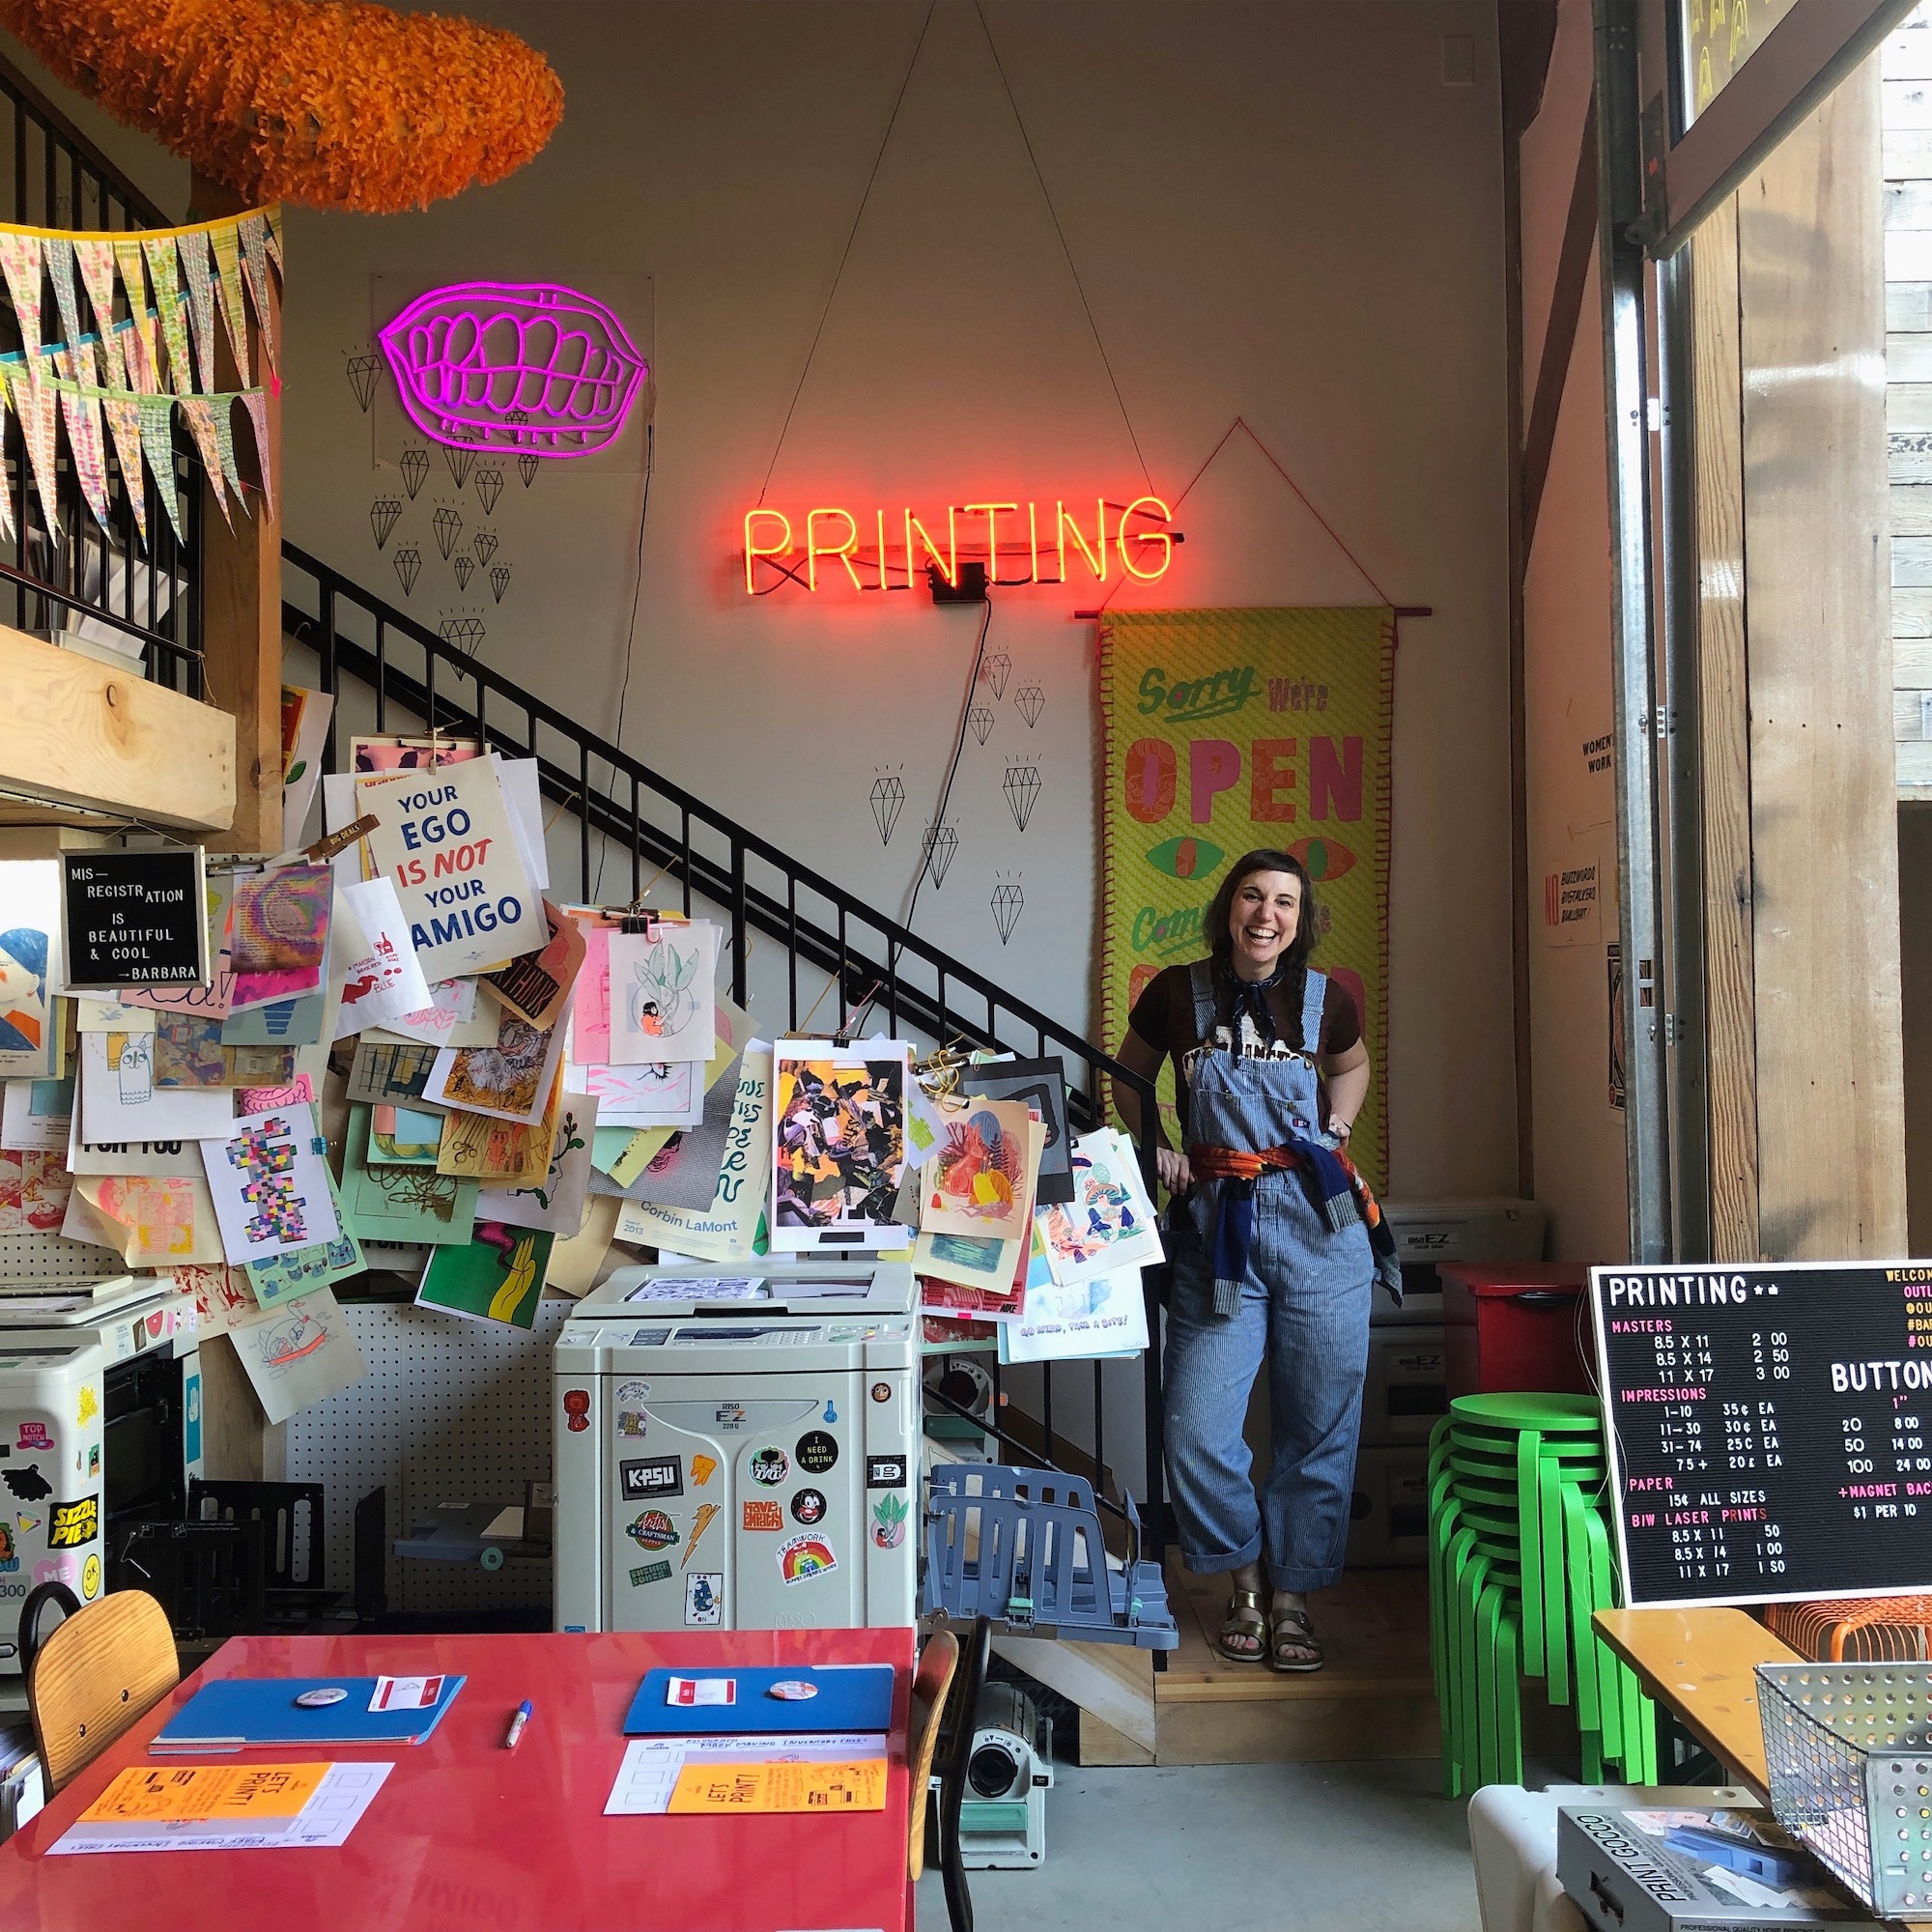 Kate Bingaman Burt stands next to a Risograph printer under a neon sign that says "Printing"